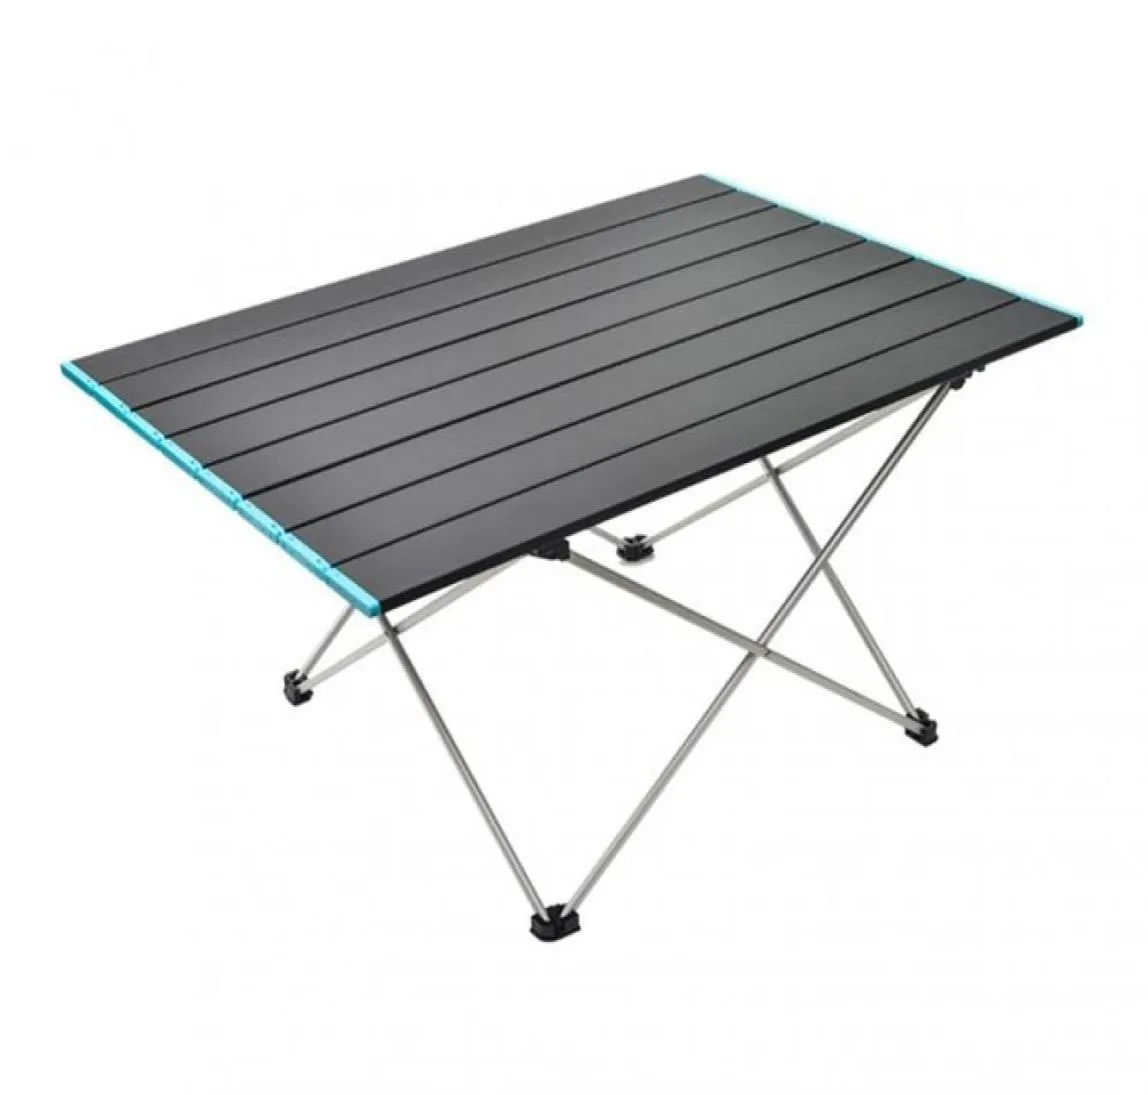 Portable Folding Camping Table Outdoor Dinner Desk Home Barbecue Picnic Ultra Light Aluminum Alloy Traveling Tables 2205045905564